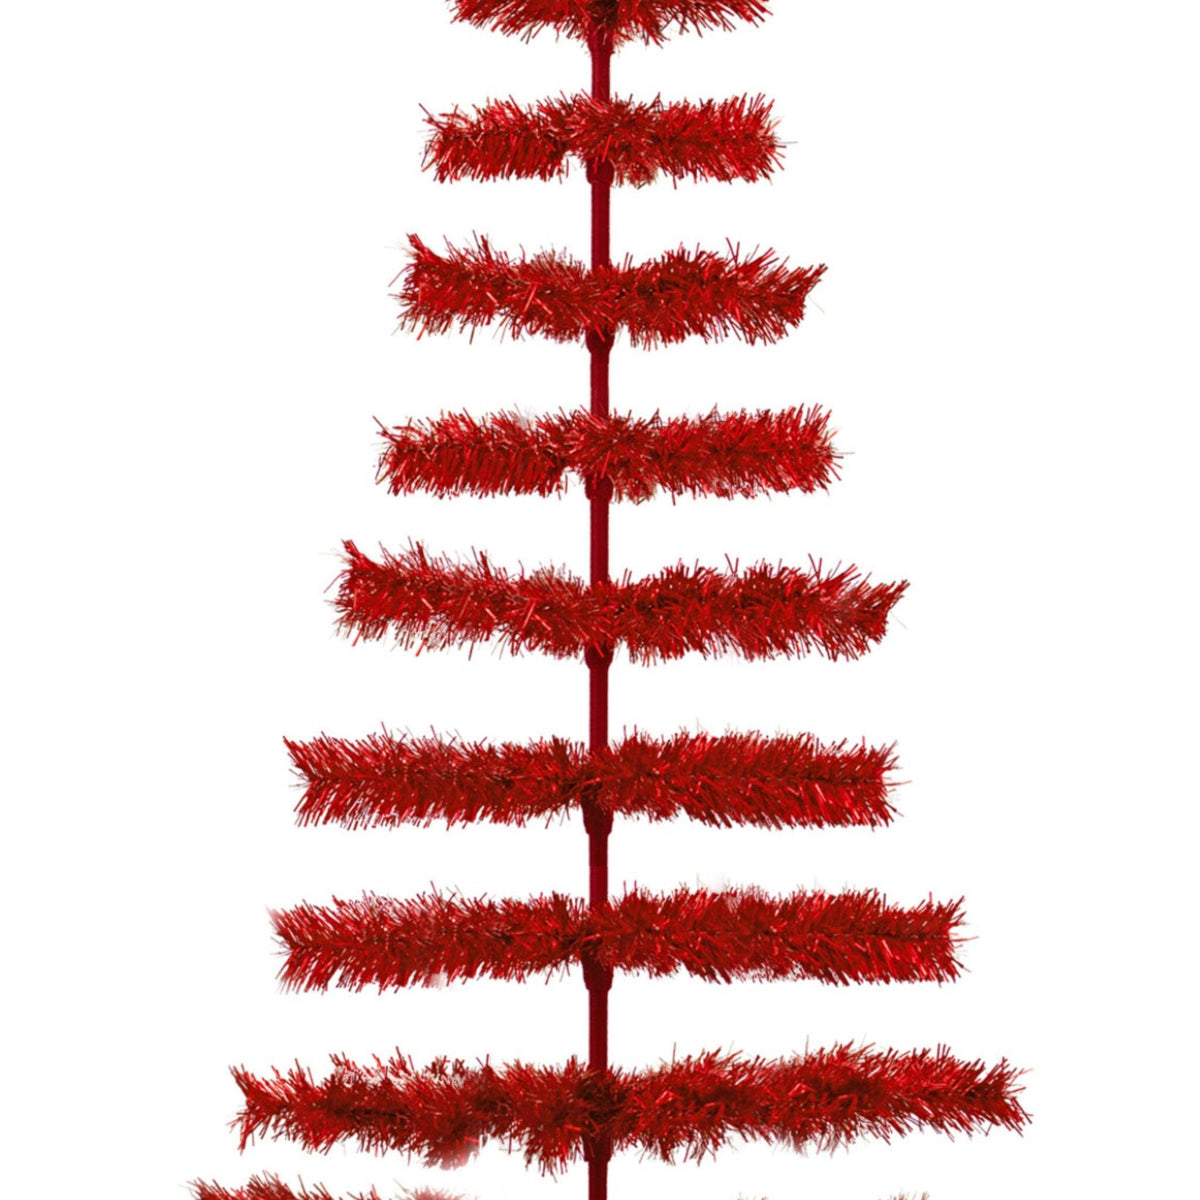 Middle branch section of the shiny metallic red tinsel brush on the 60in Red Christmas Trees made by Lee Display